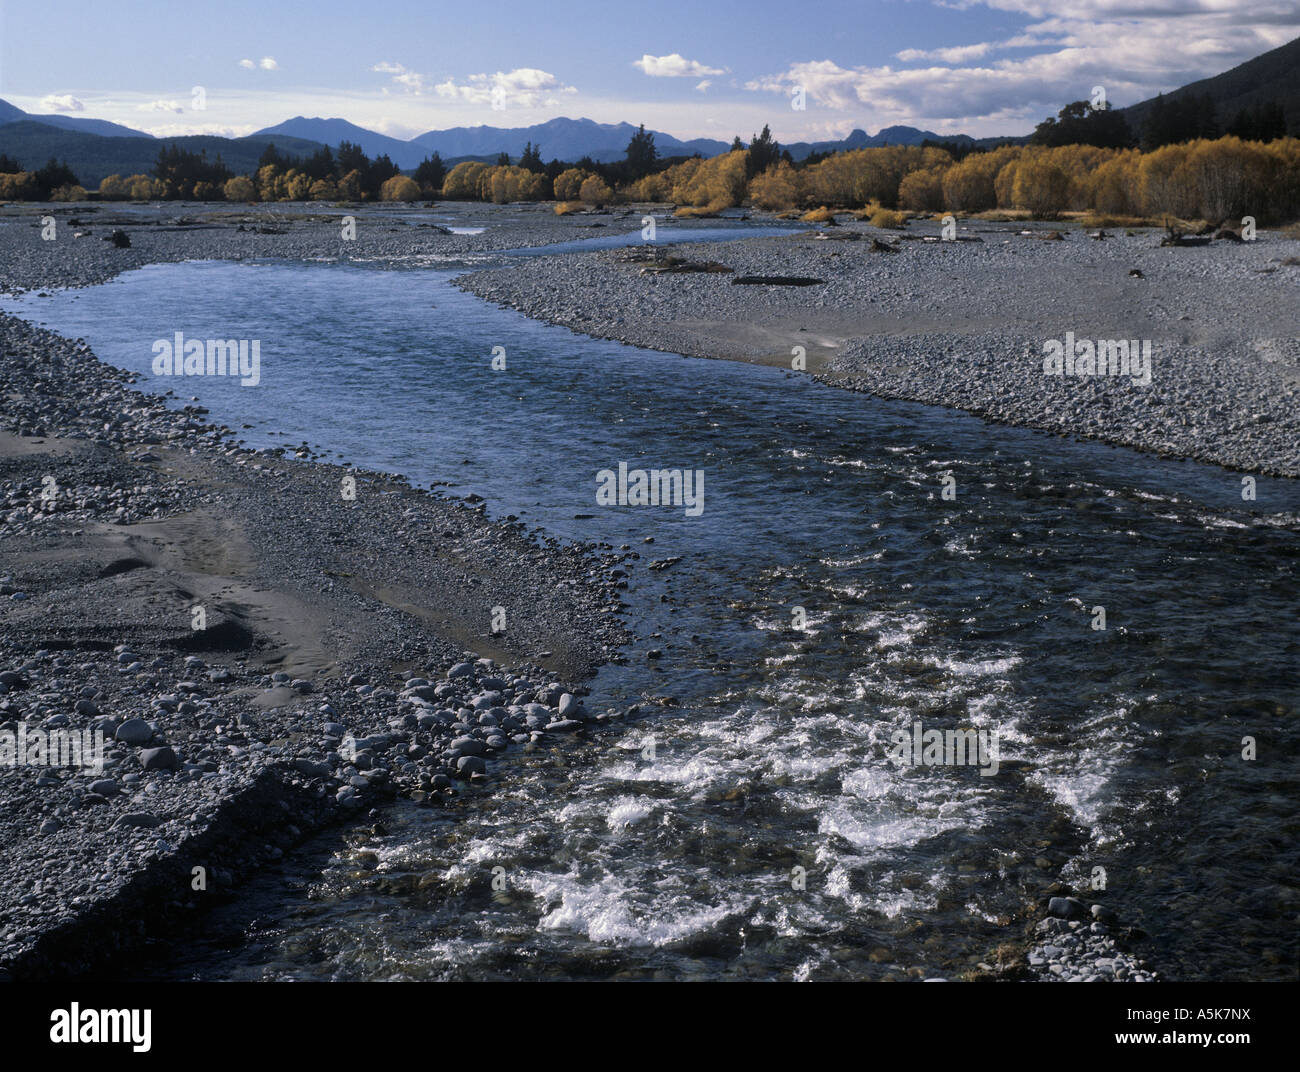 Landscape, Maruia-River between Maruia and Springs Junction, South-Island, New Zealand Stock Photo